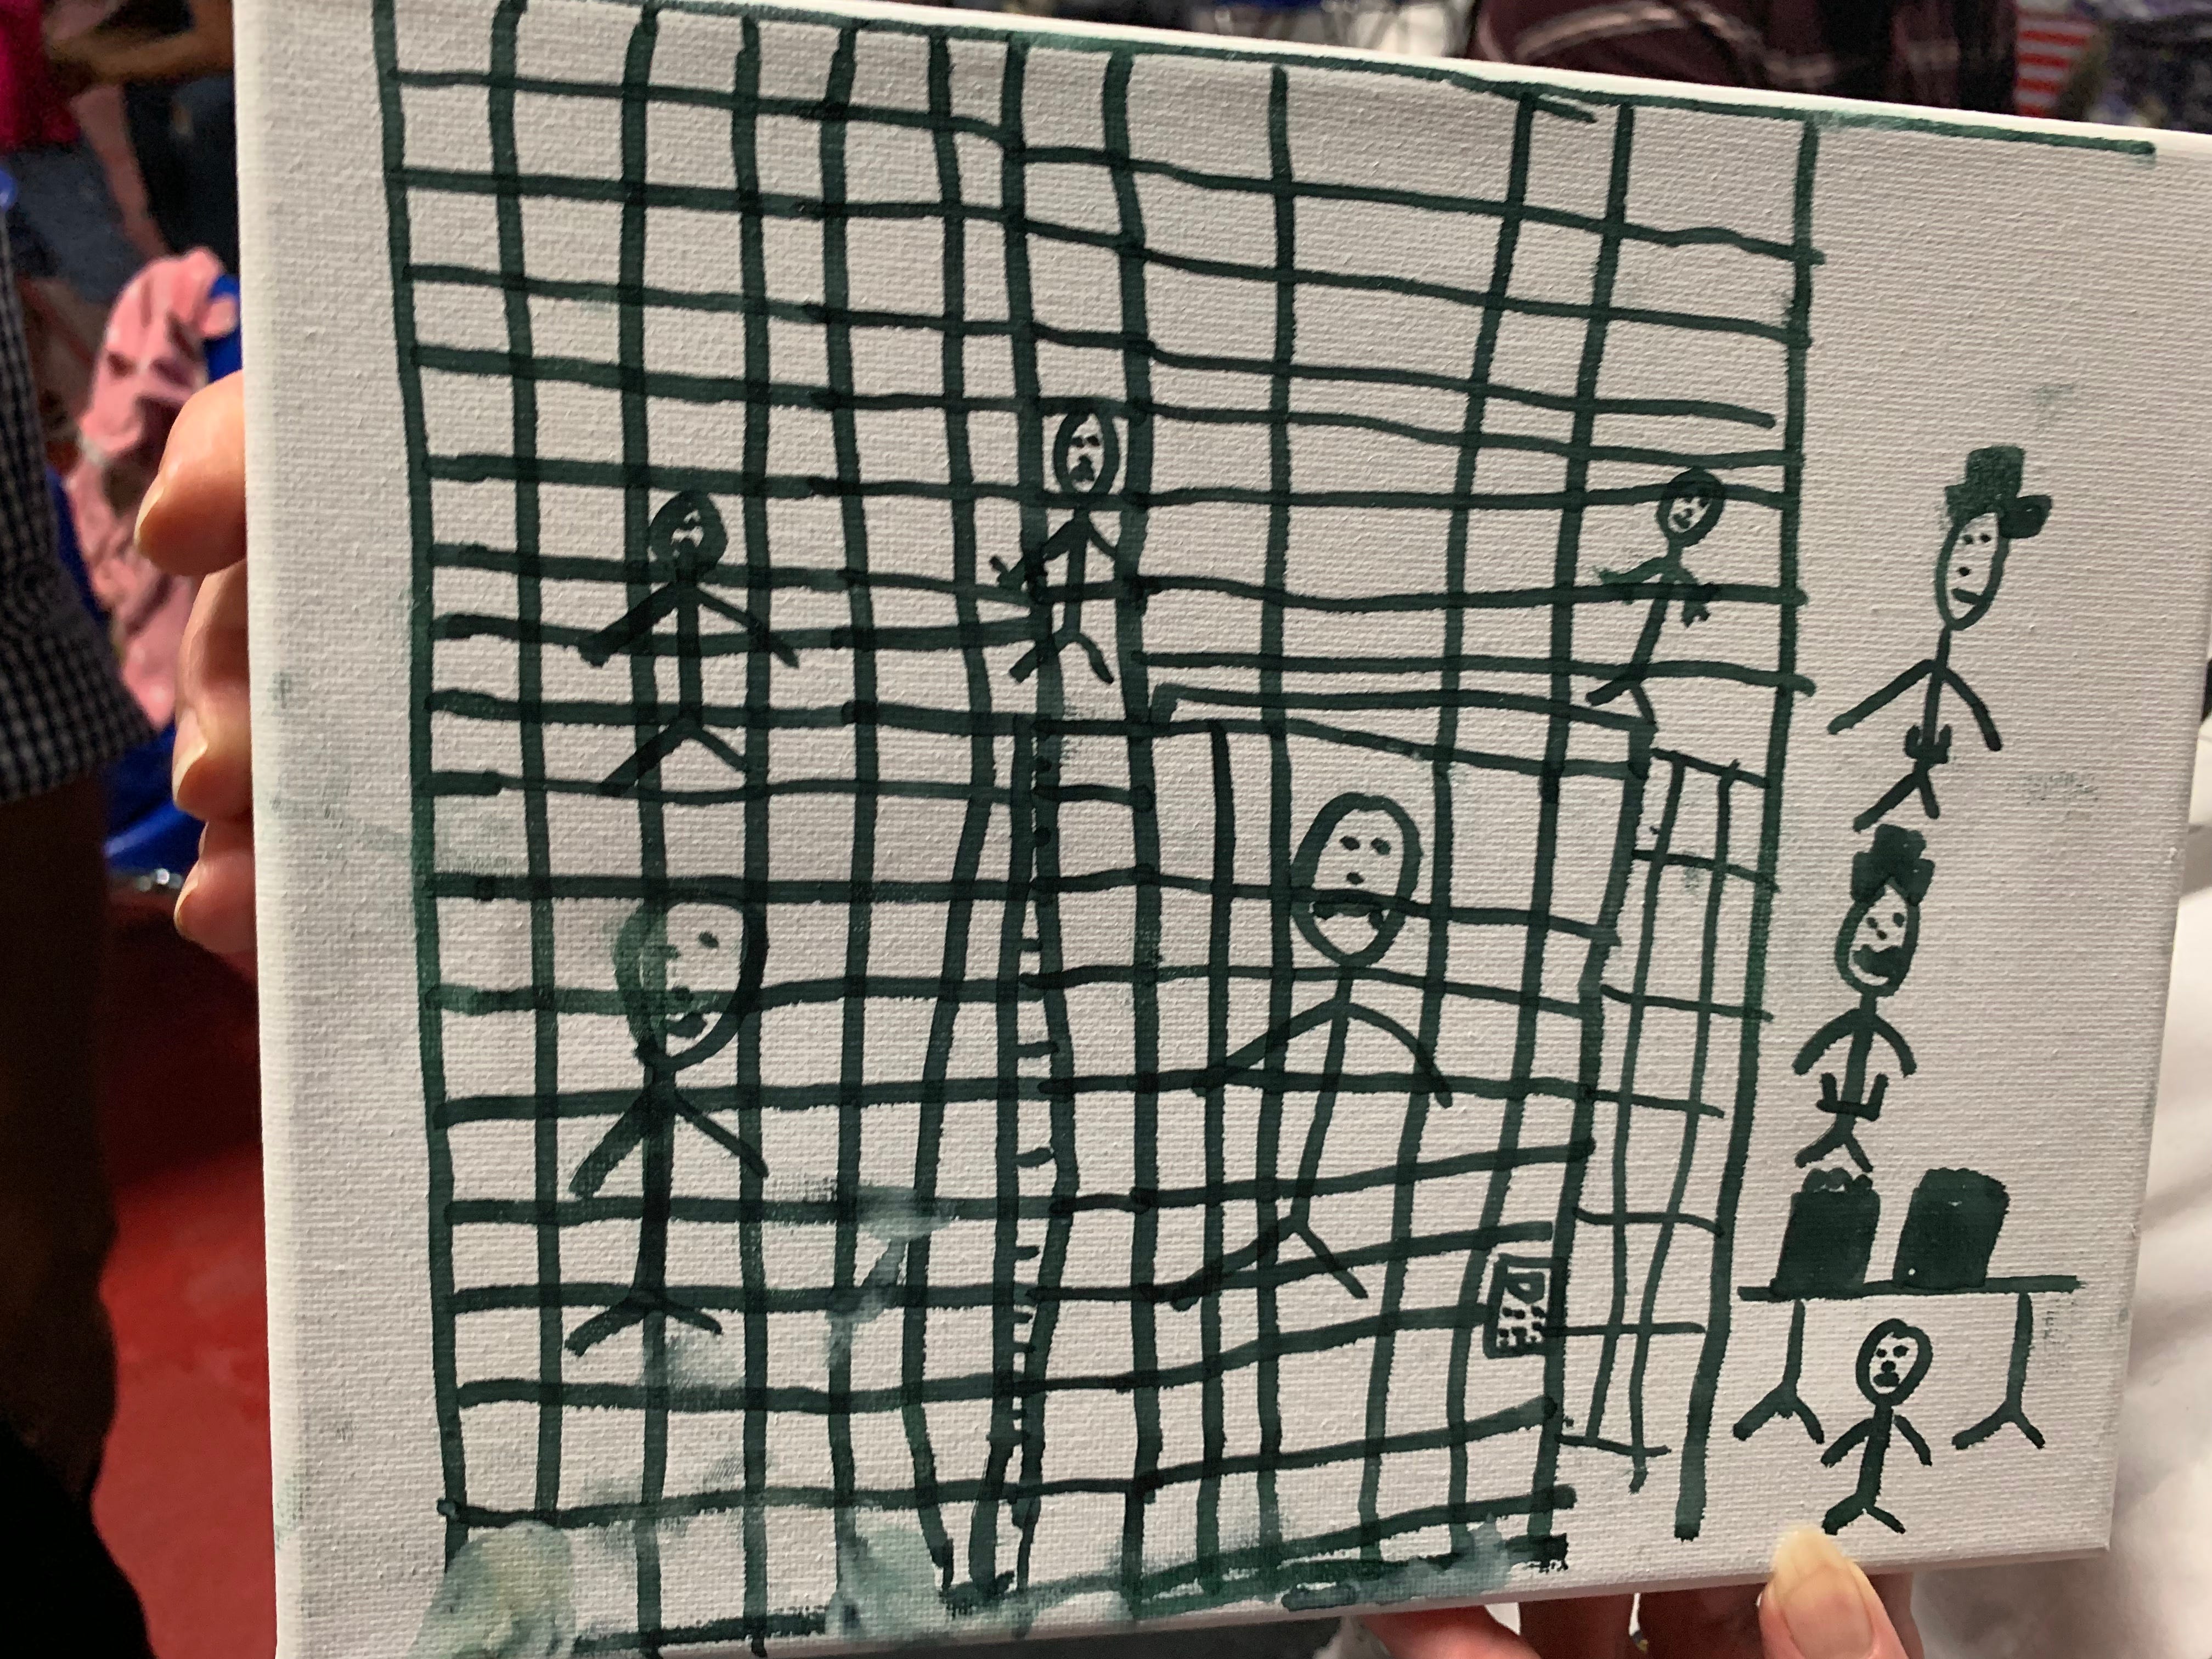 Child's drawing of border detention facility